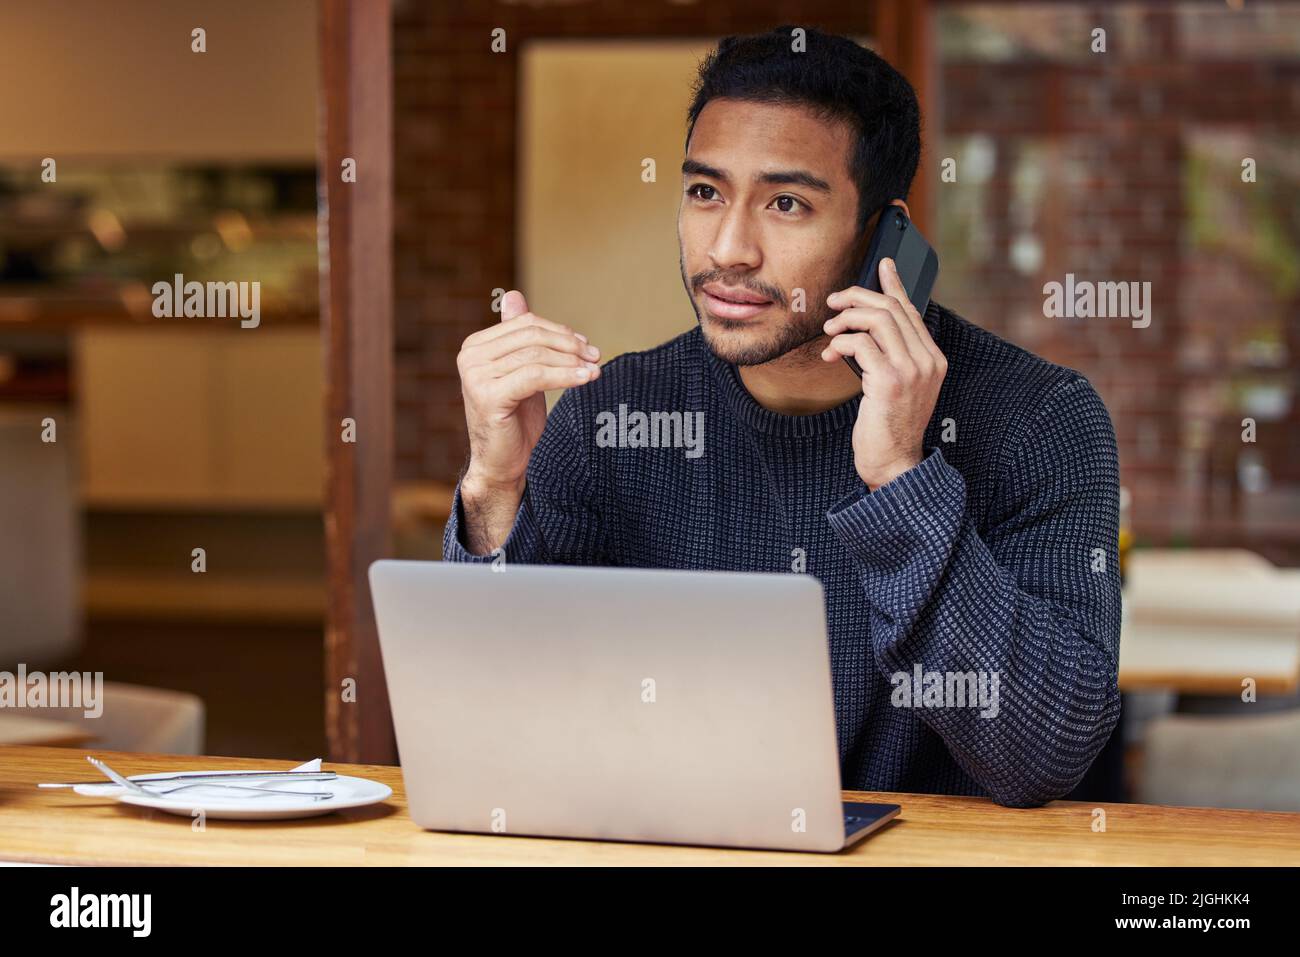 You can meet me at the cafe and we can discuss it. a man talking on his cellphone and using his laptop while sitting in a cafe. Stock Photo